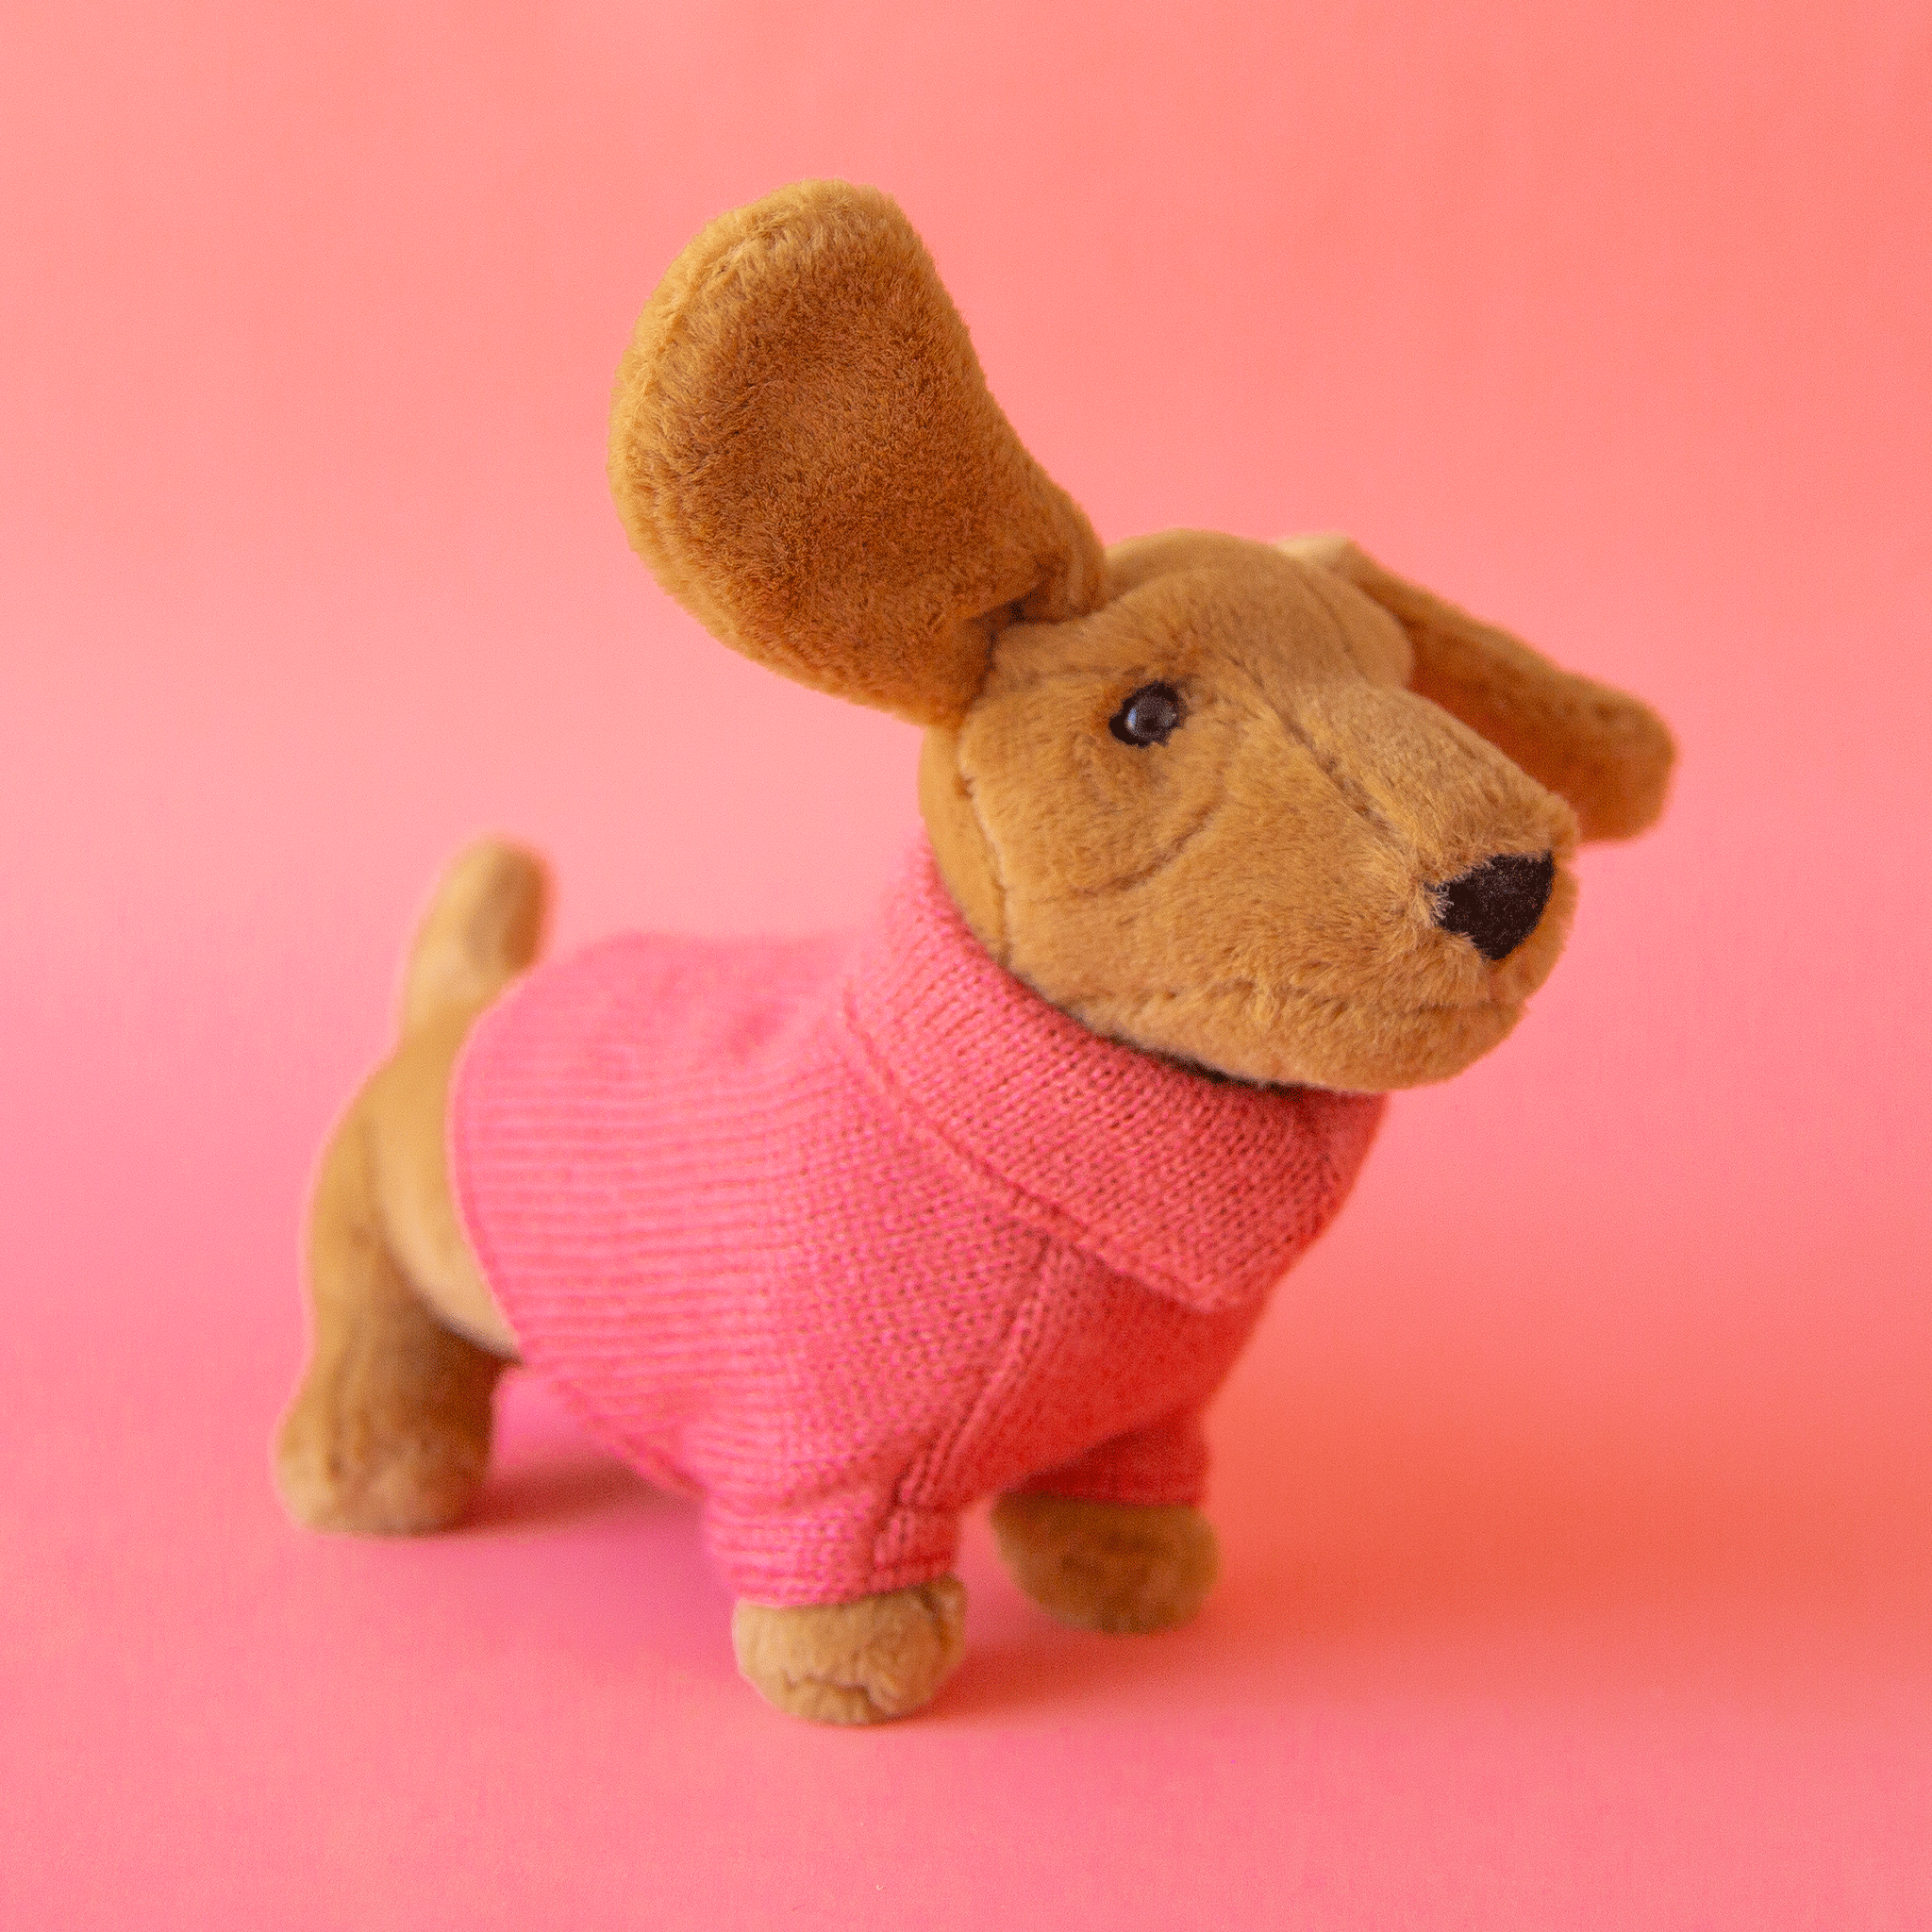 On a pink background is a tan sausage dog stuffed animal wearing a pink sweater.